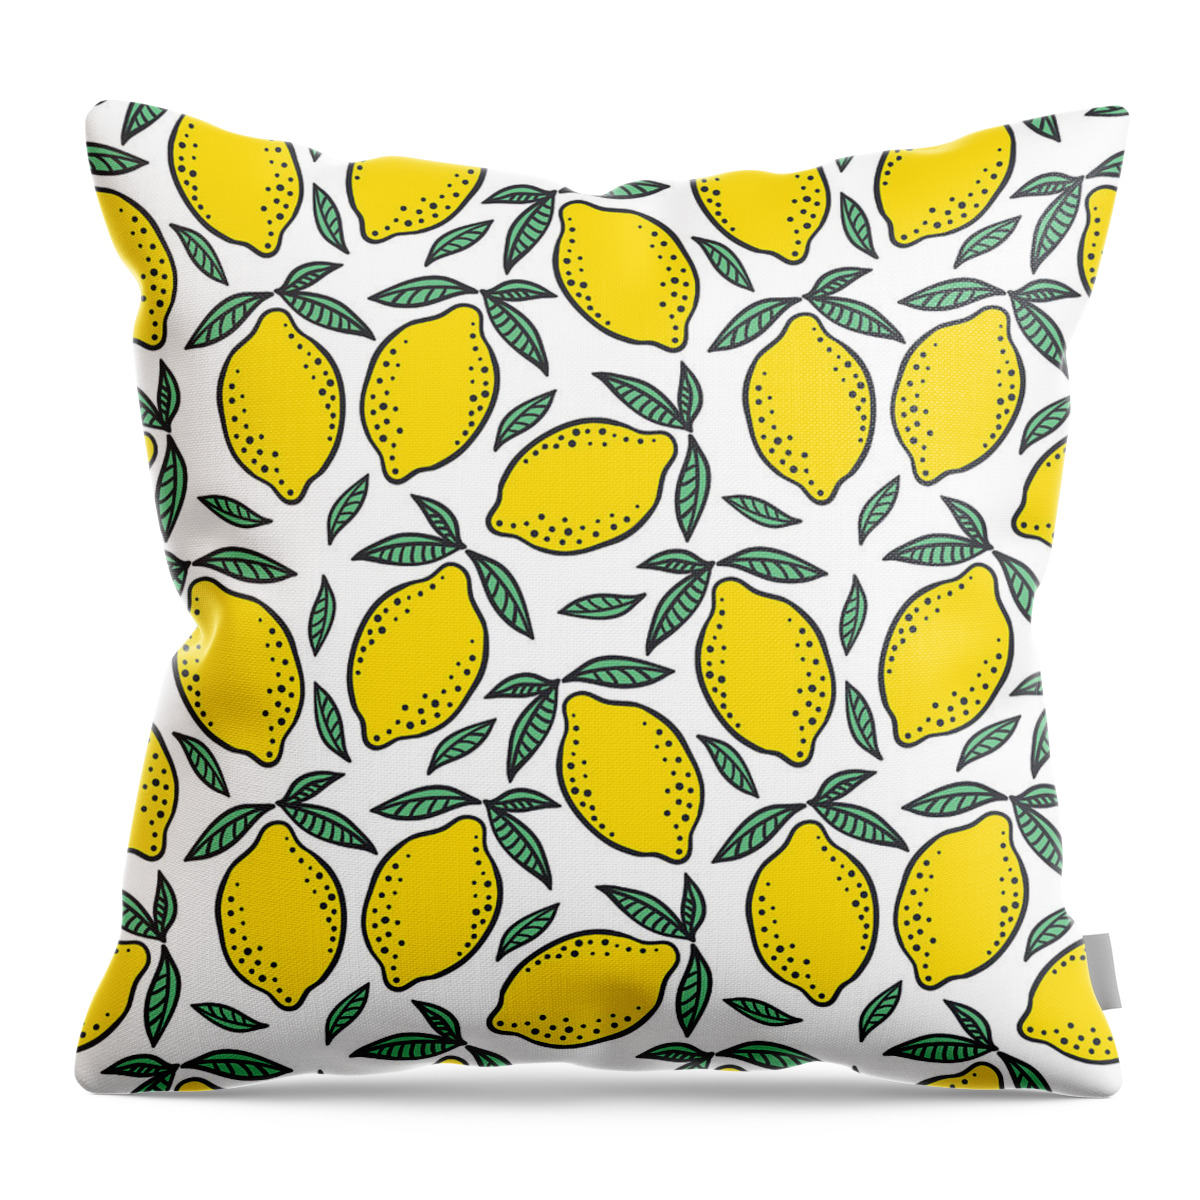 Art Throw Pillow featuring the digital art Hand Drawn Colorful Seamless Pattern Of by Ekaterina Bedoeva